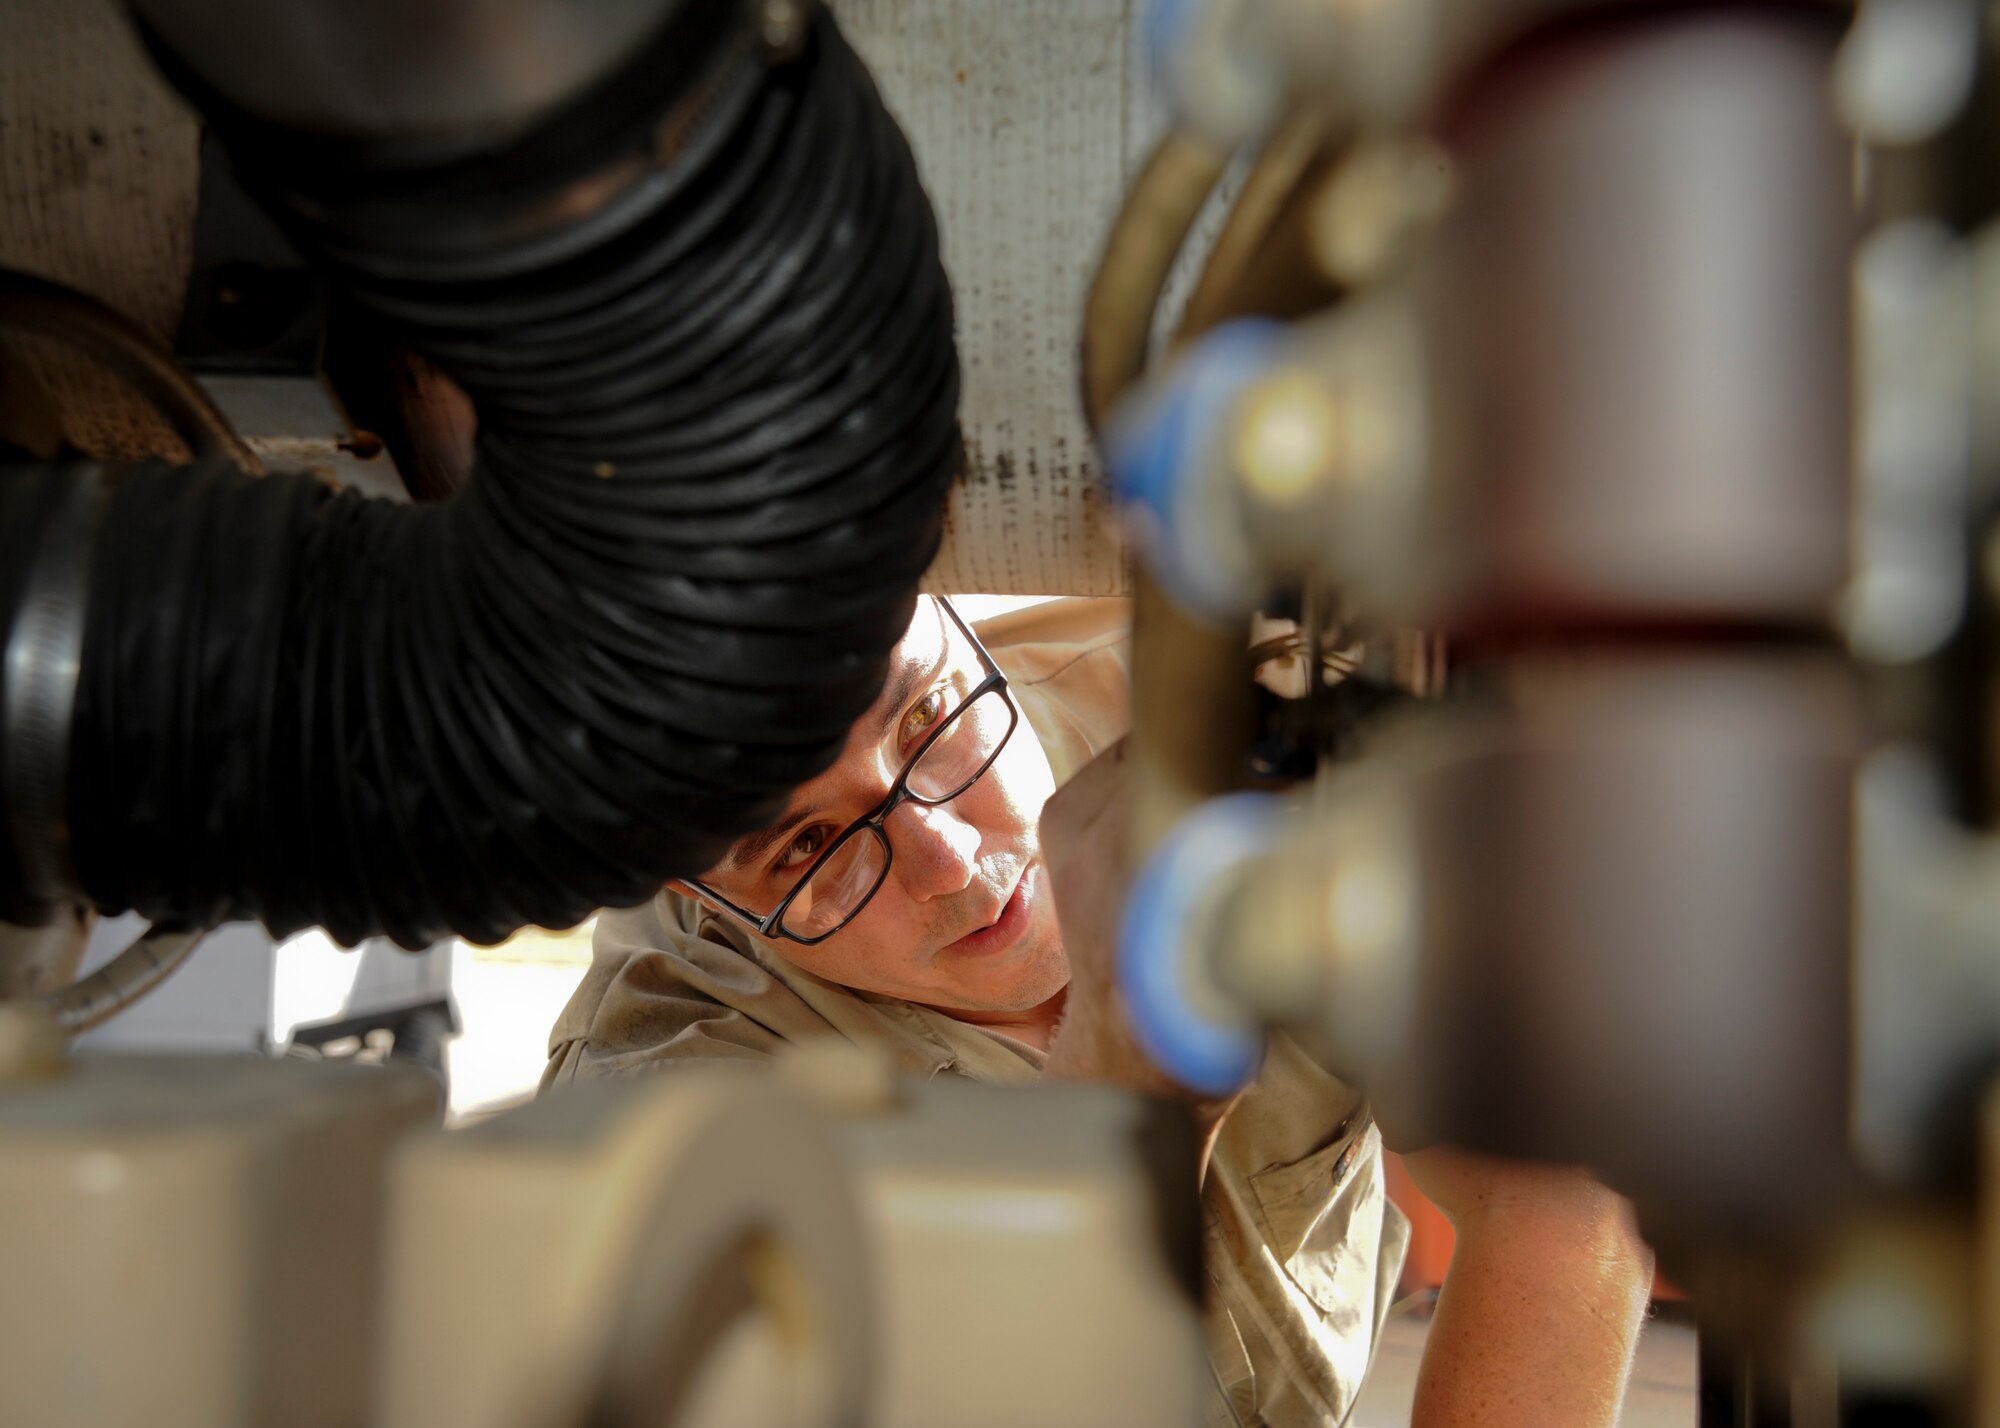 Senior Airman Joshua Farr, 22nd Maintenance Squadron aerospace ground equipment flight journeyman, inspects a generator, Nov. 5, 2015, at McConnell Air Force Base, Kan. The AGE flight monitors, inspects and maintains more than 500 pieces of equipment used across the entire 22nd Maintenance Group. (U.S. Air Force photo/Senior Airman Victor J. Caputo)